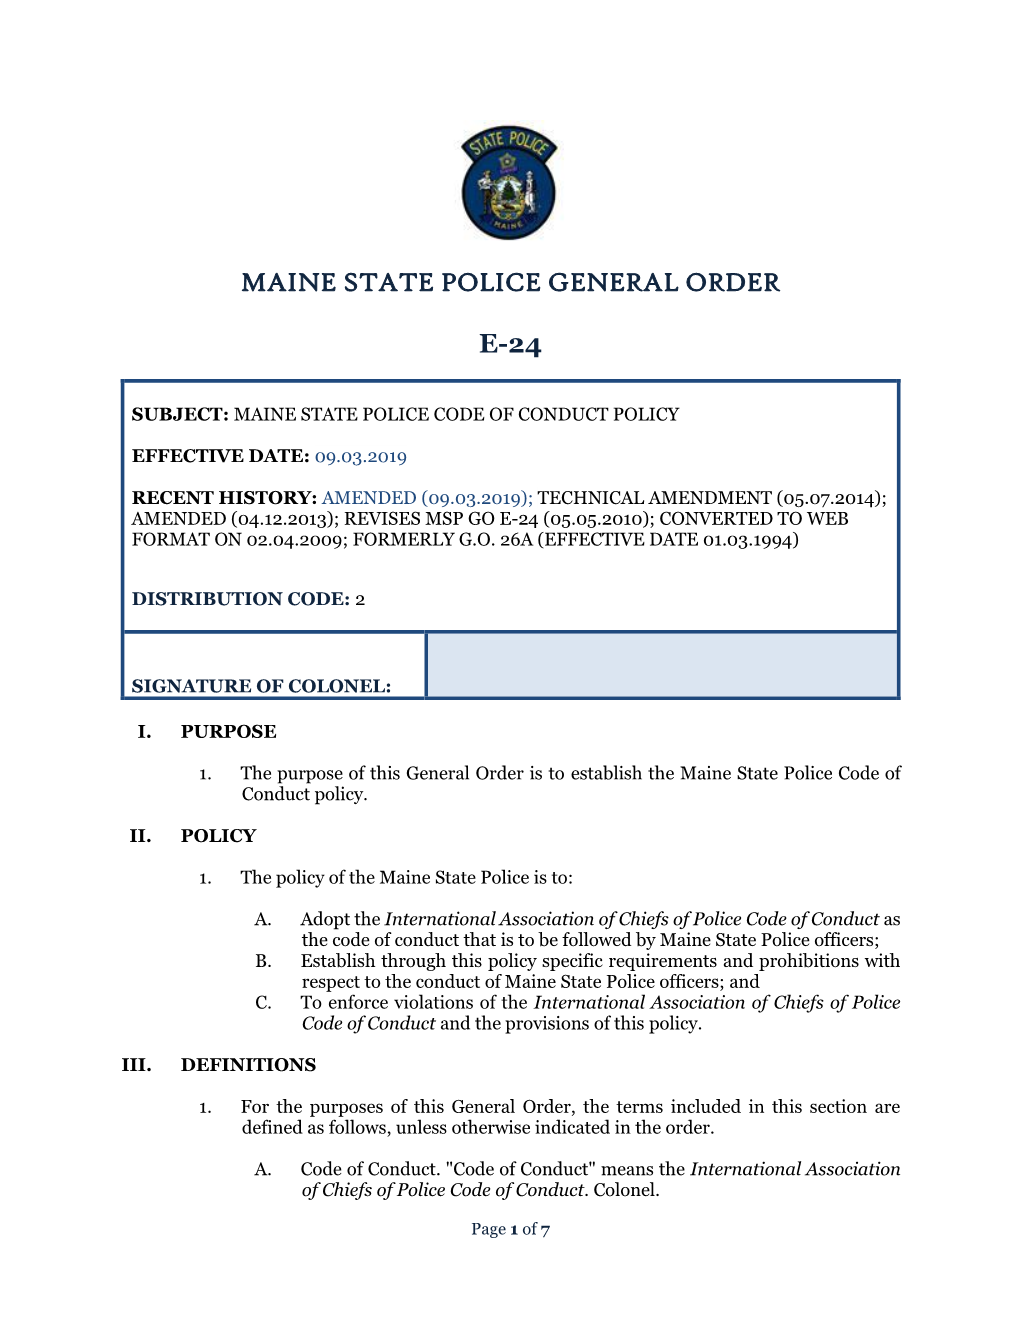 Maine State Police General Order E-24